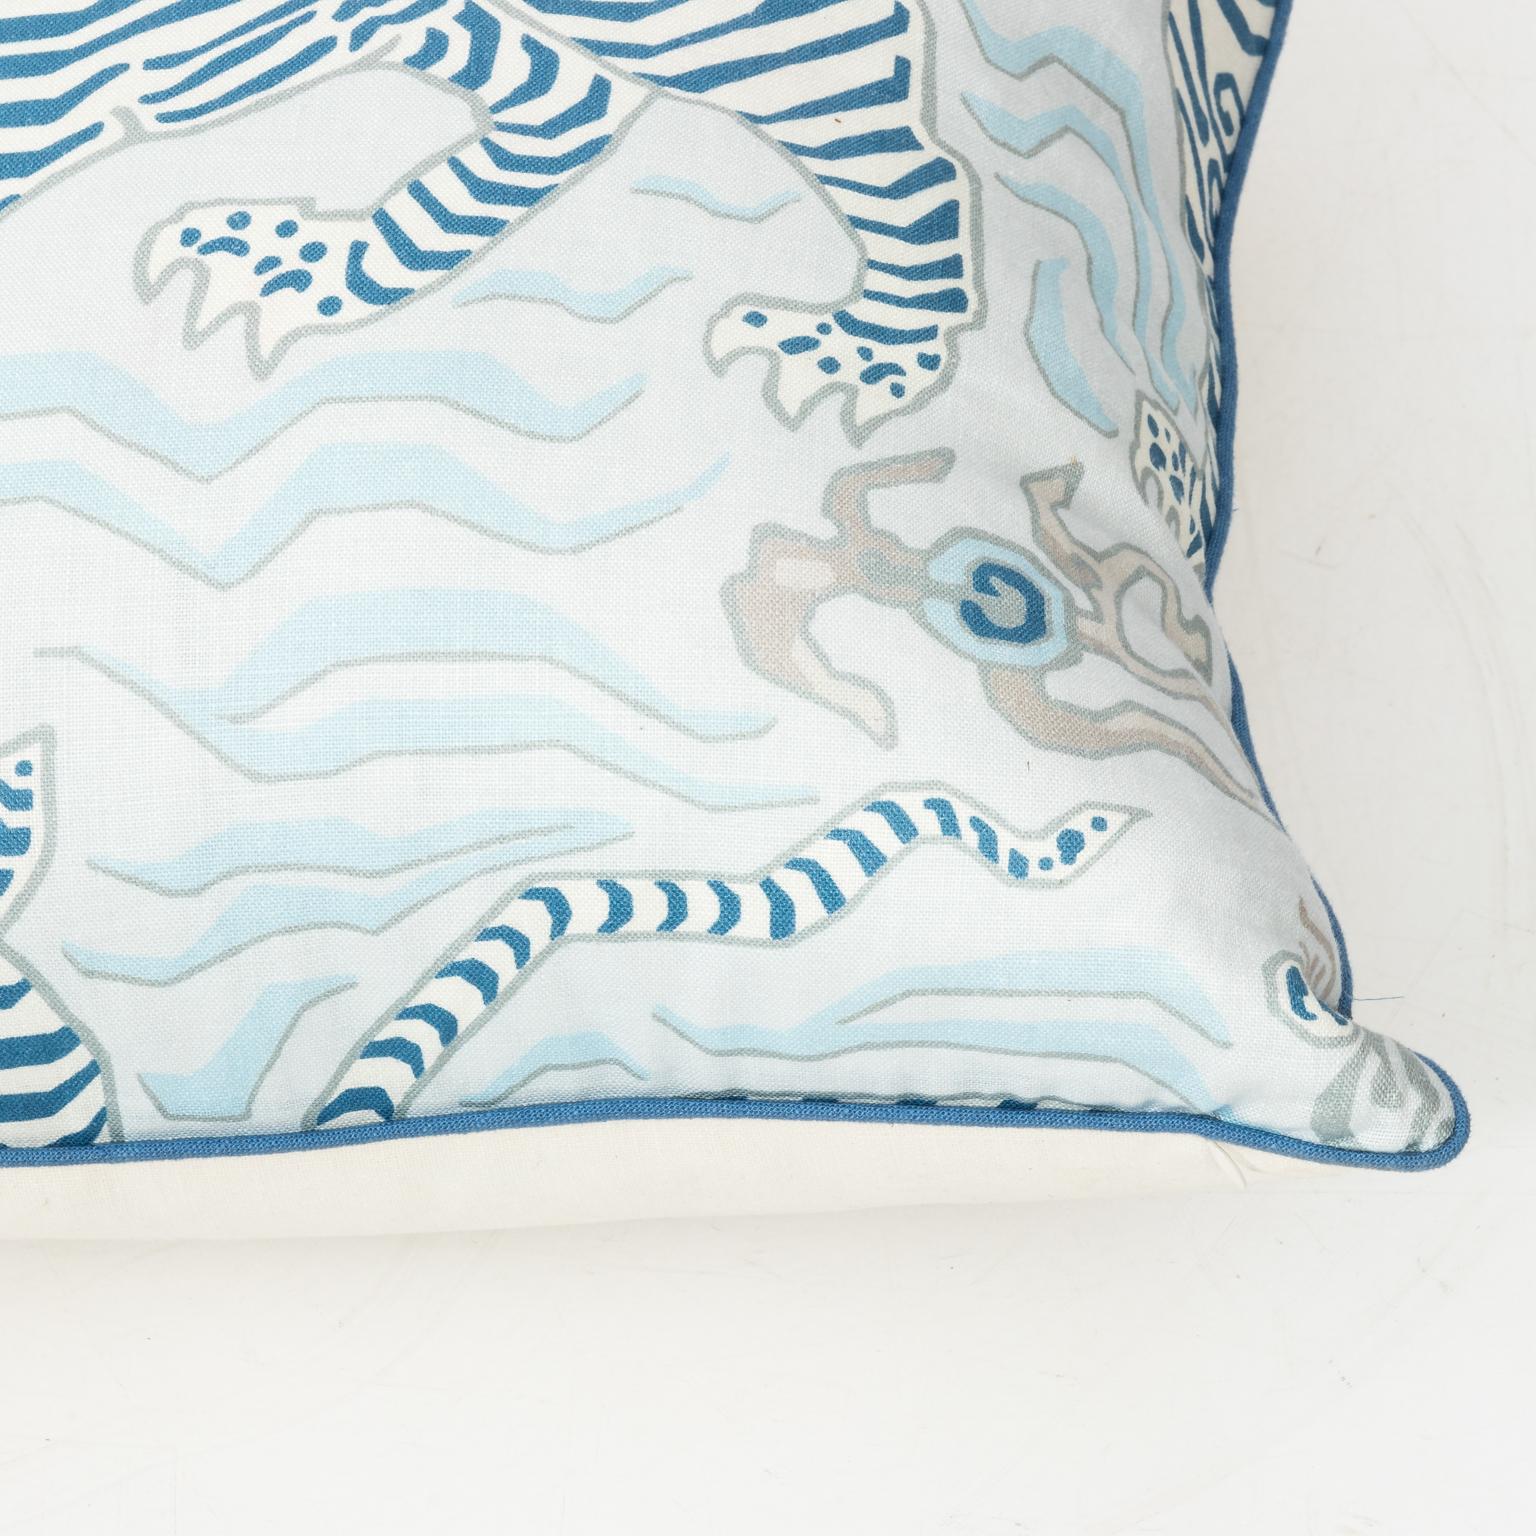 Blue and white linen pillow with stripped tiger motif stuffed with down and feathers.
 